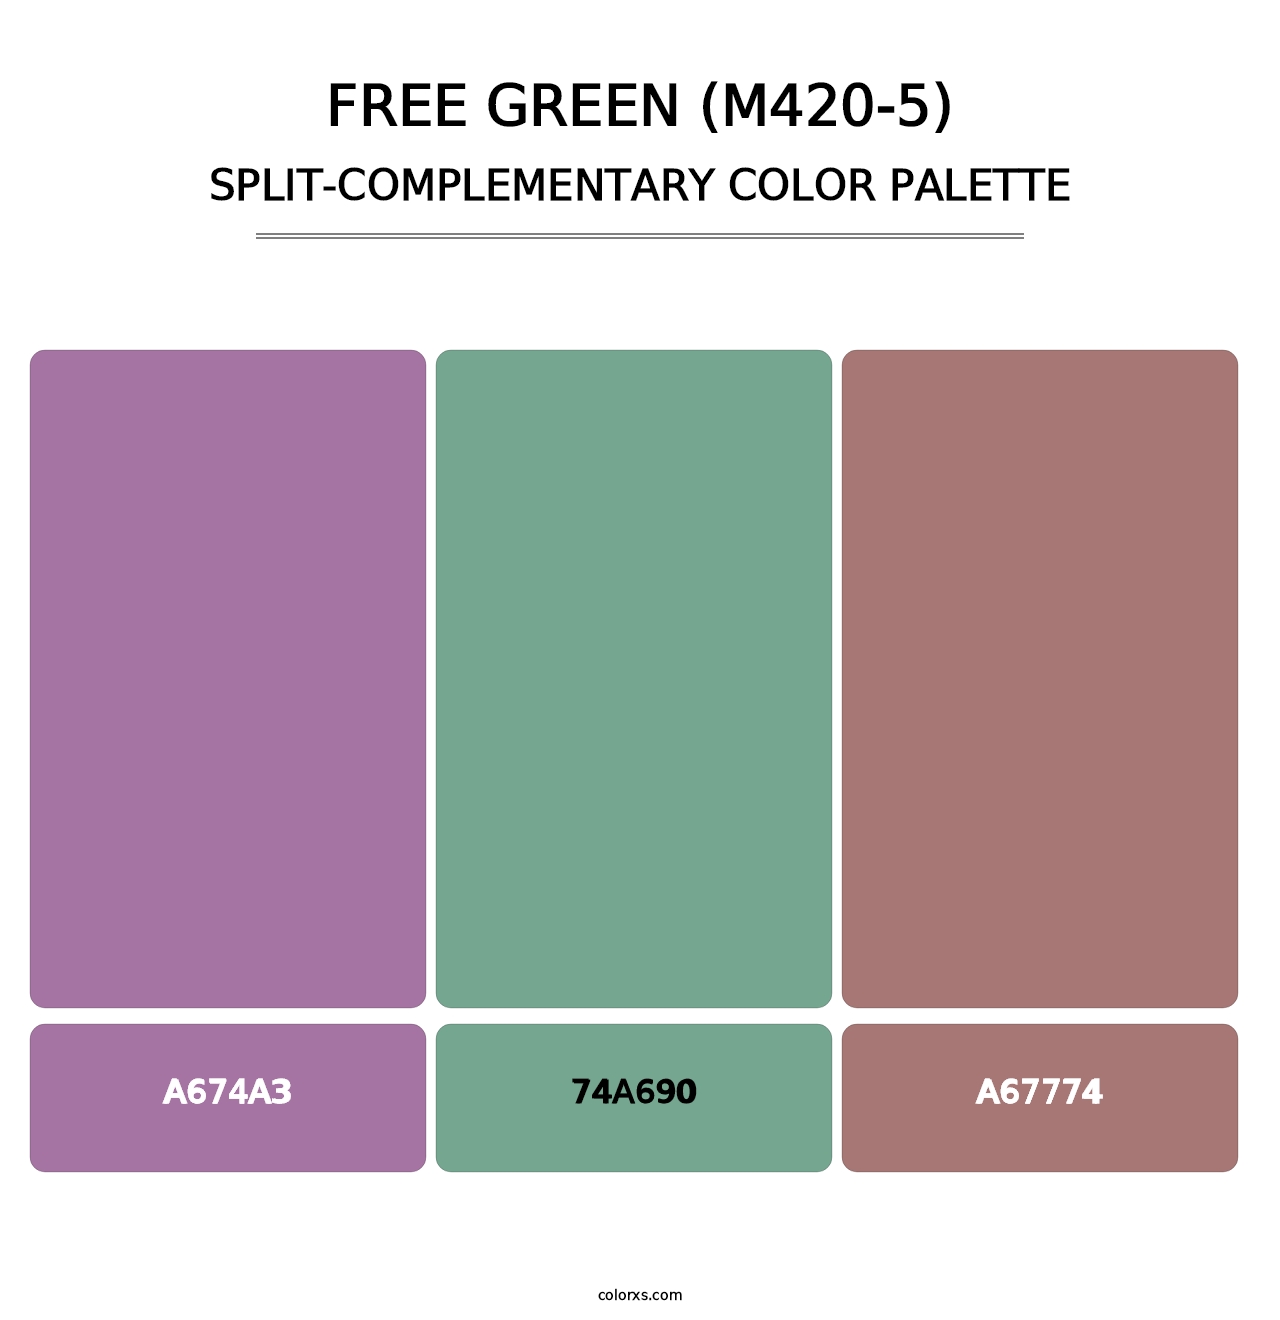 Free Green (M420-5) - Split-Complementary Color Palette